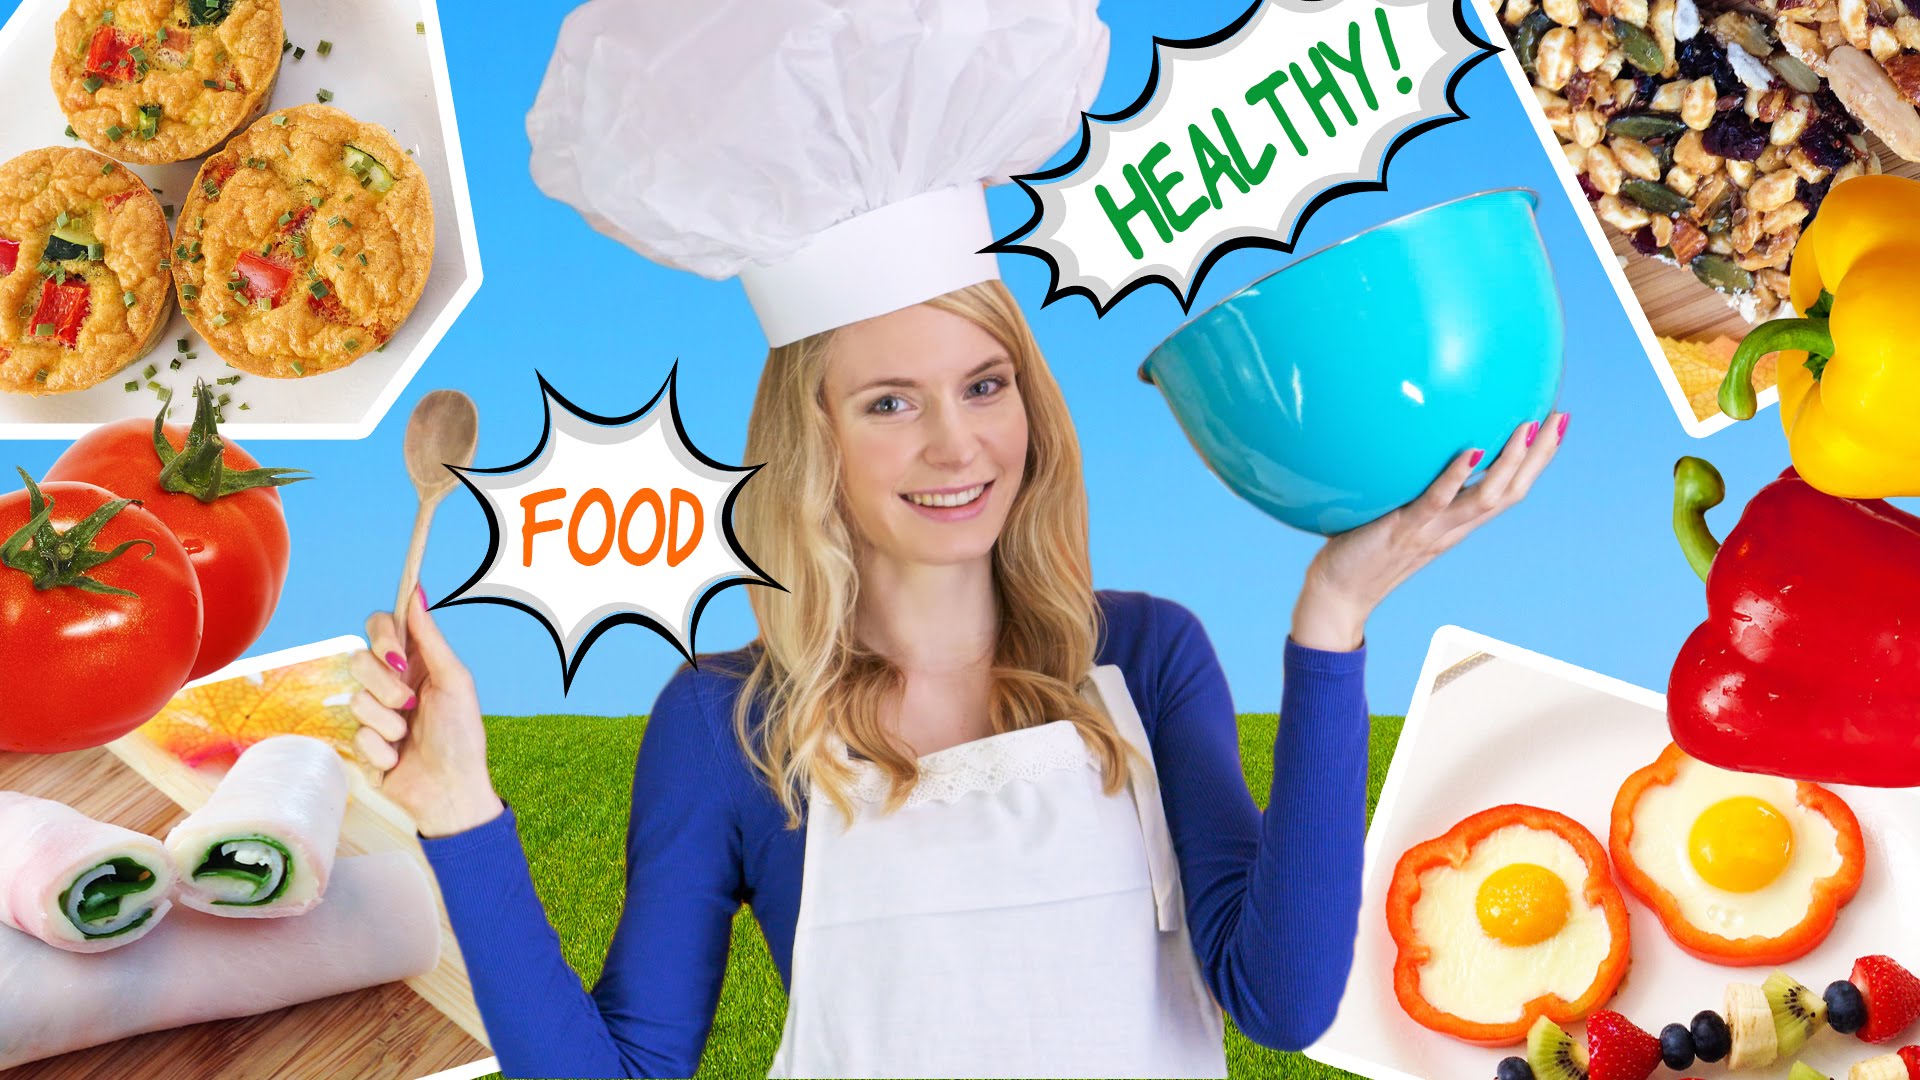 How to Cook Healthy Food! 10 Breakfast Ideas,  Lunch Ideas & Snacks for School, Work!